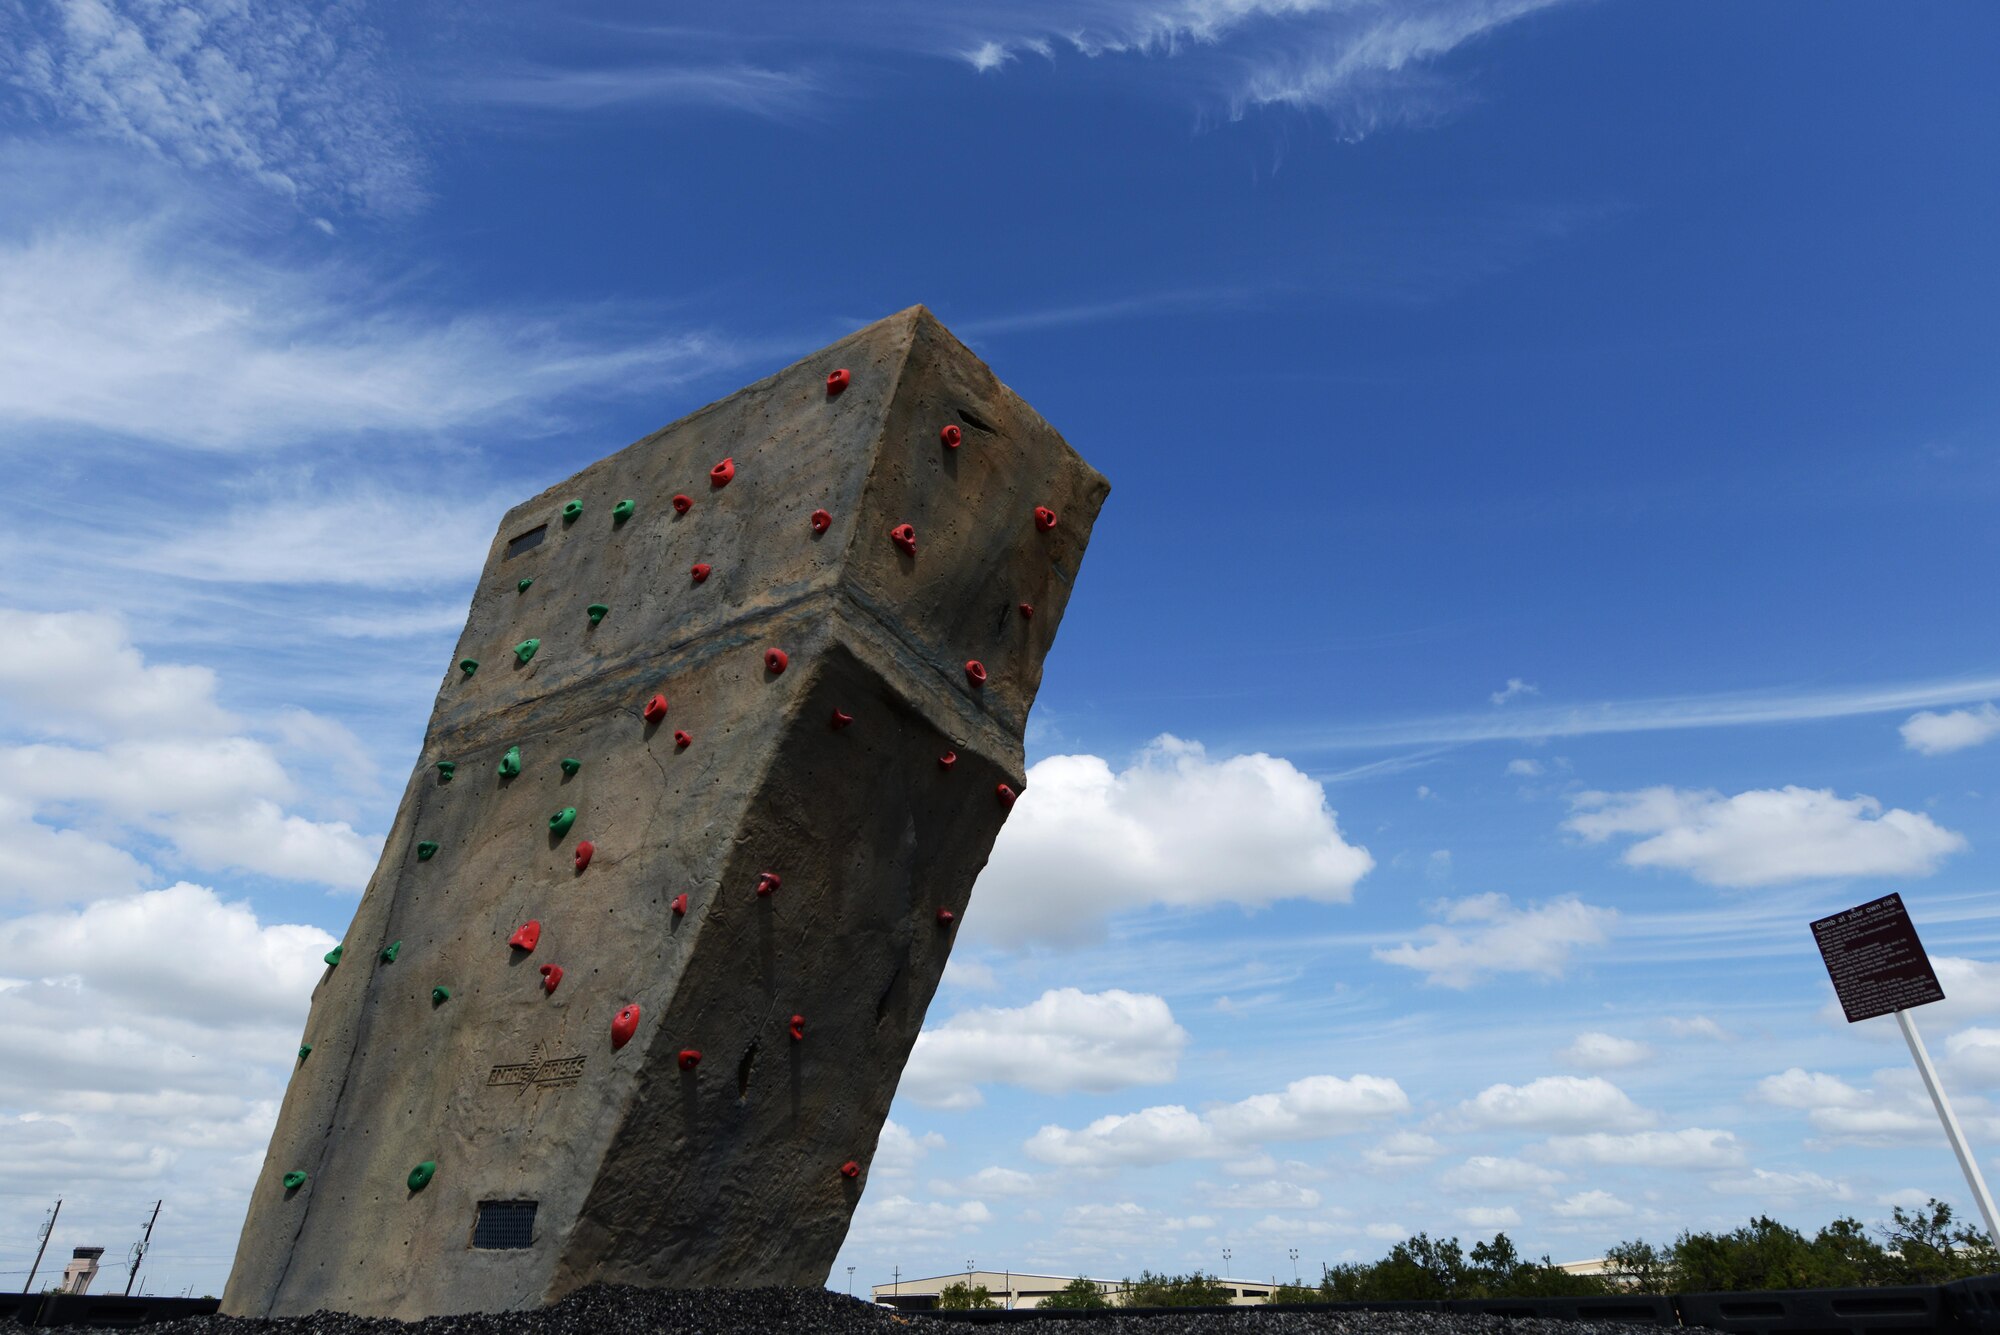 The climbing boulder stands on Laughlin Air Force Base, Texas, Oct. 20, 2015. The climbing boulder is less than two months old, free to use, and climbing shoes can be rented from Outdoor Recreation for $2 a day. (U.S. Air Force photo by Airman 1st Class Brandon May)(Released)